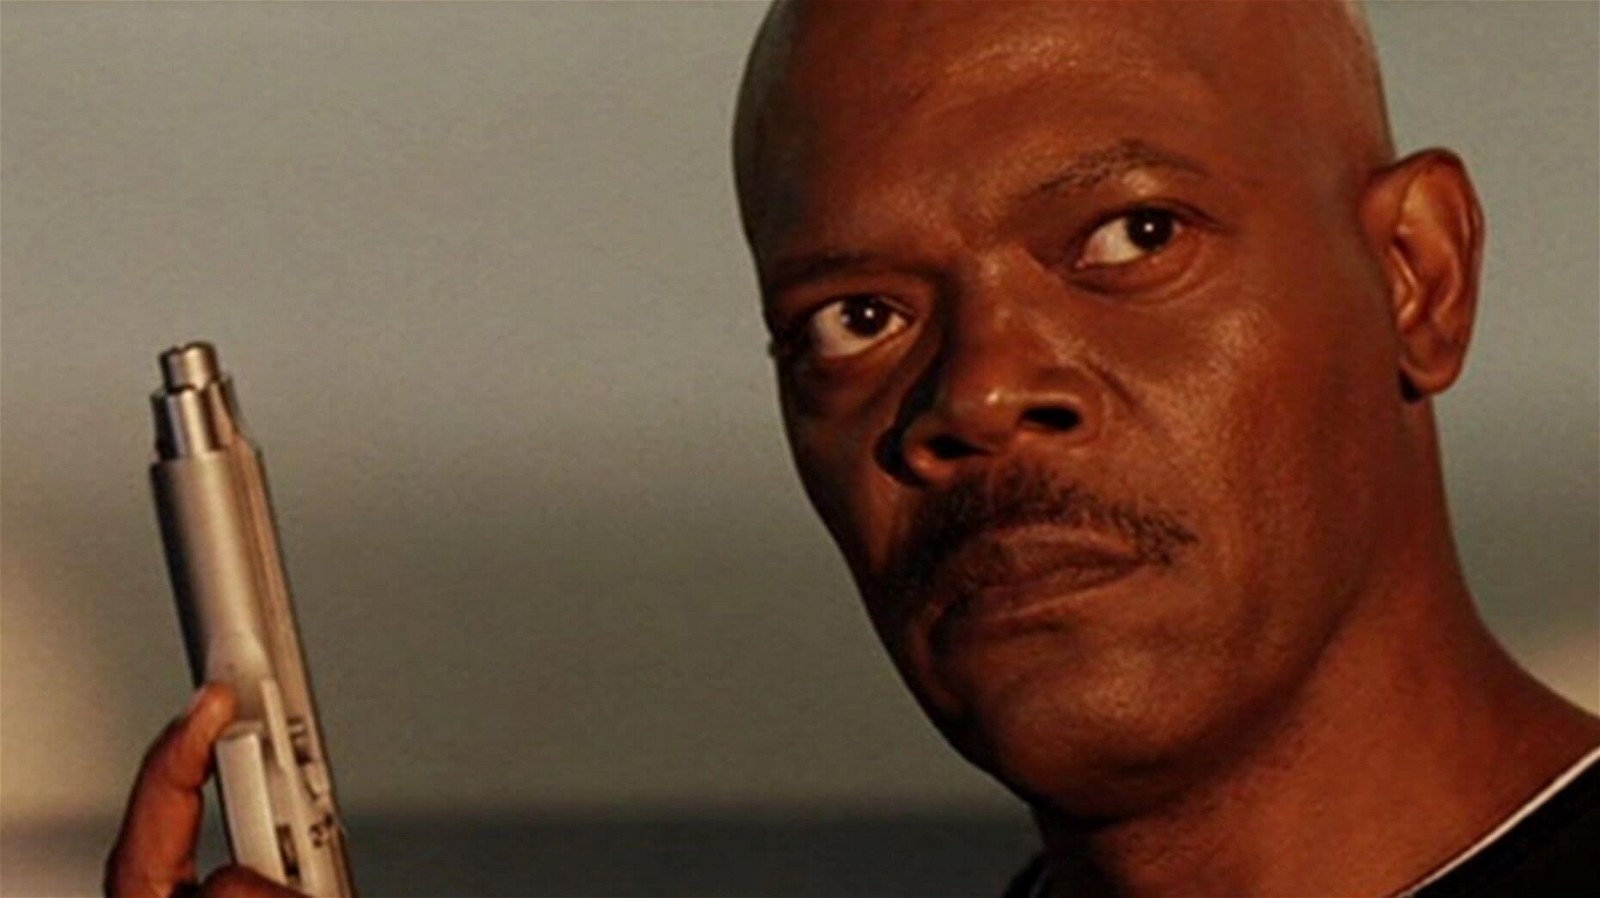 Samuel L Jackson in 'Snakes On a Plane'